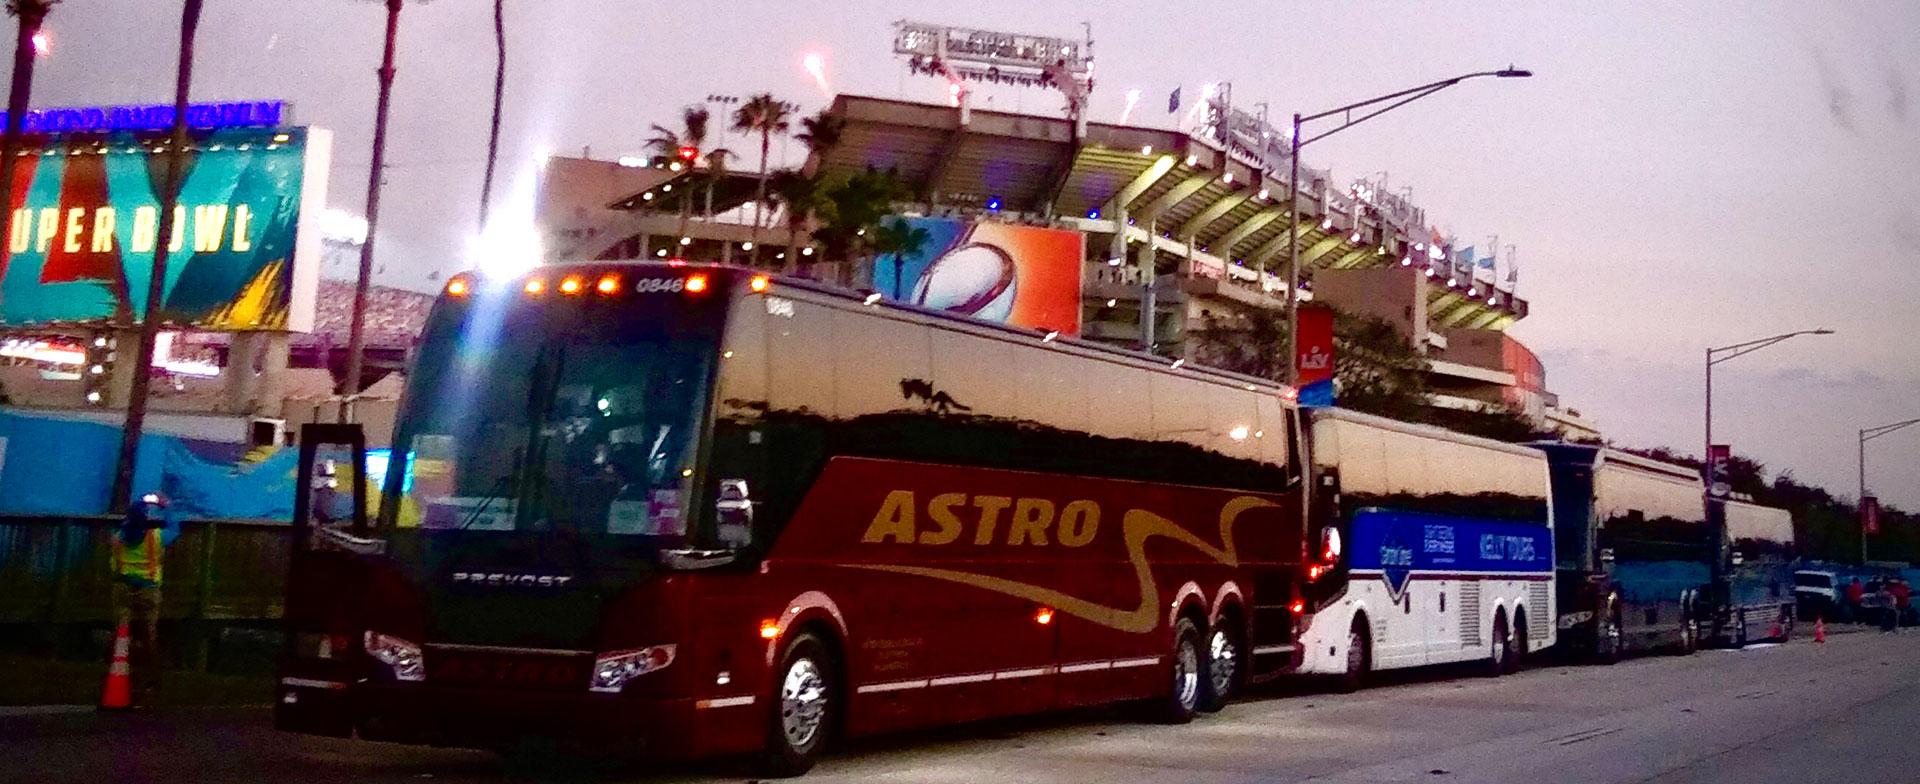 1 Charter Bus Astro Travel Tallahassee Charter Bus